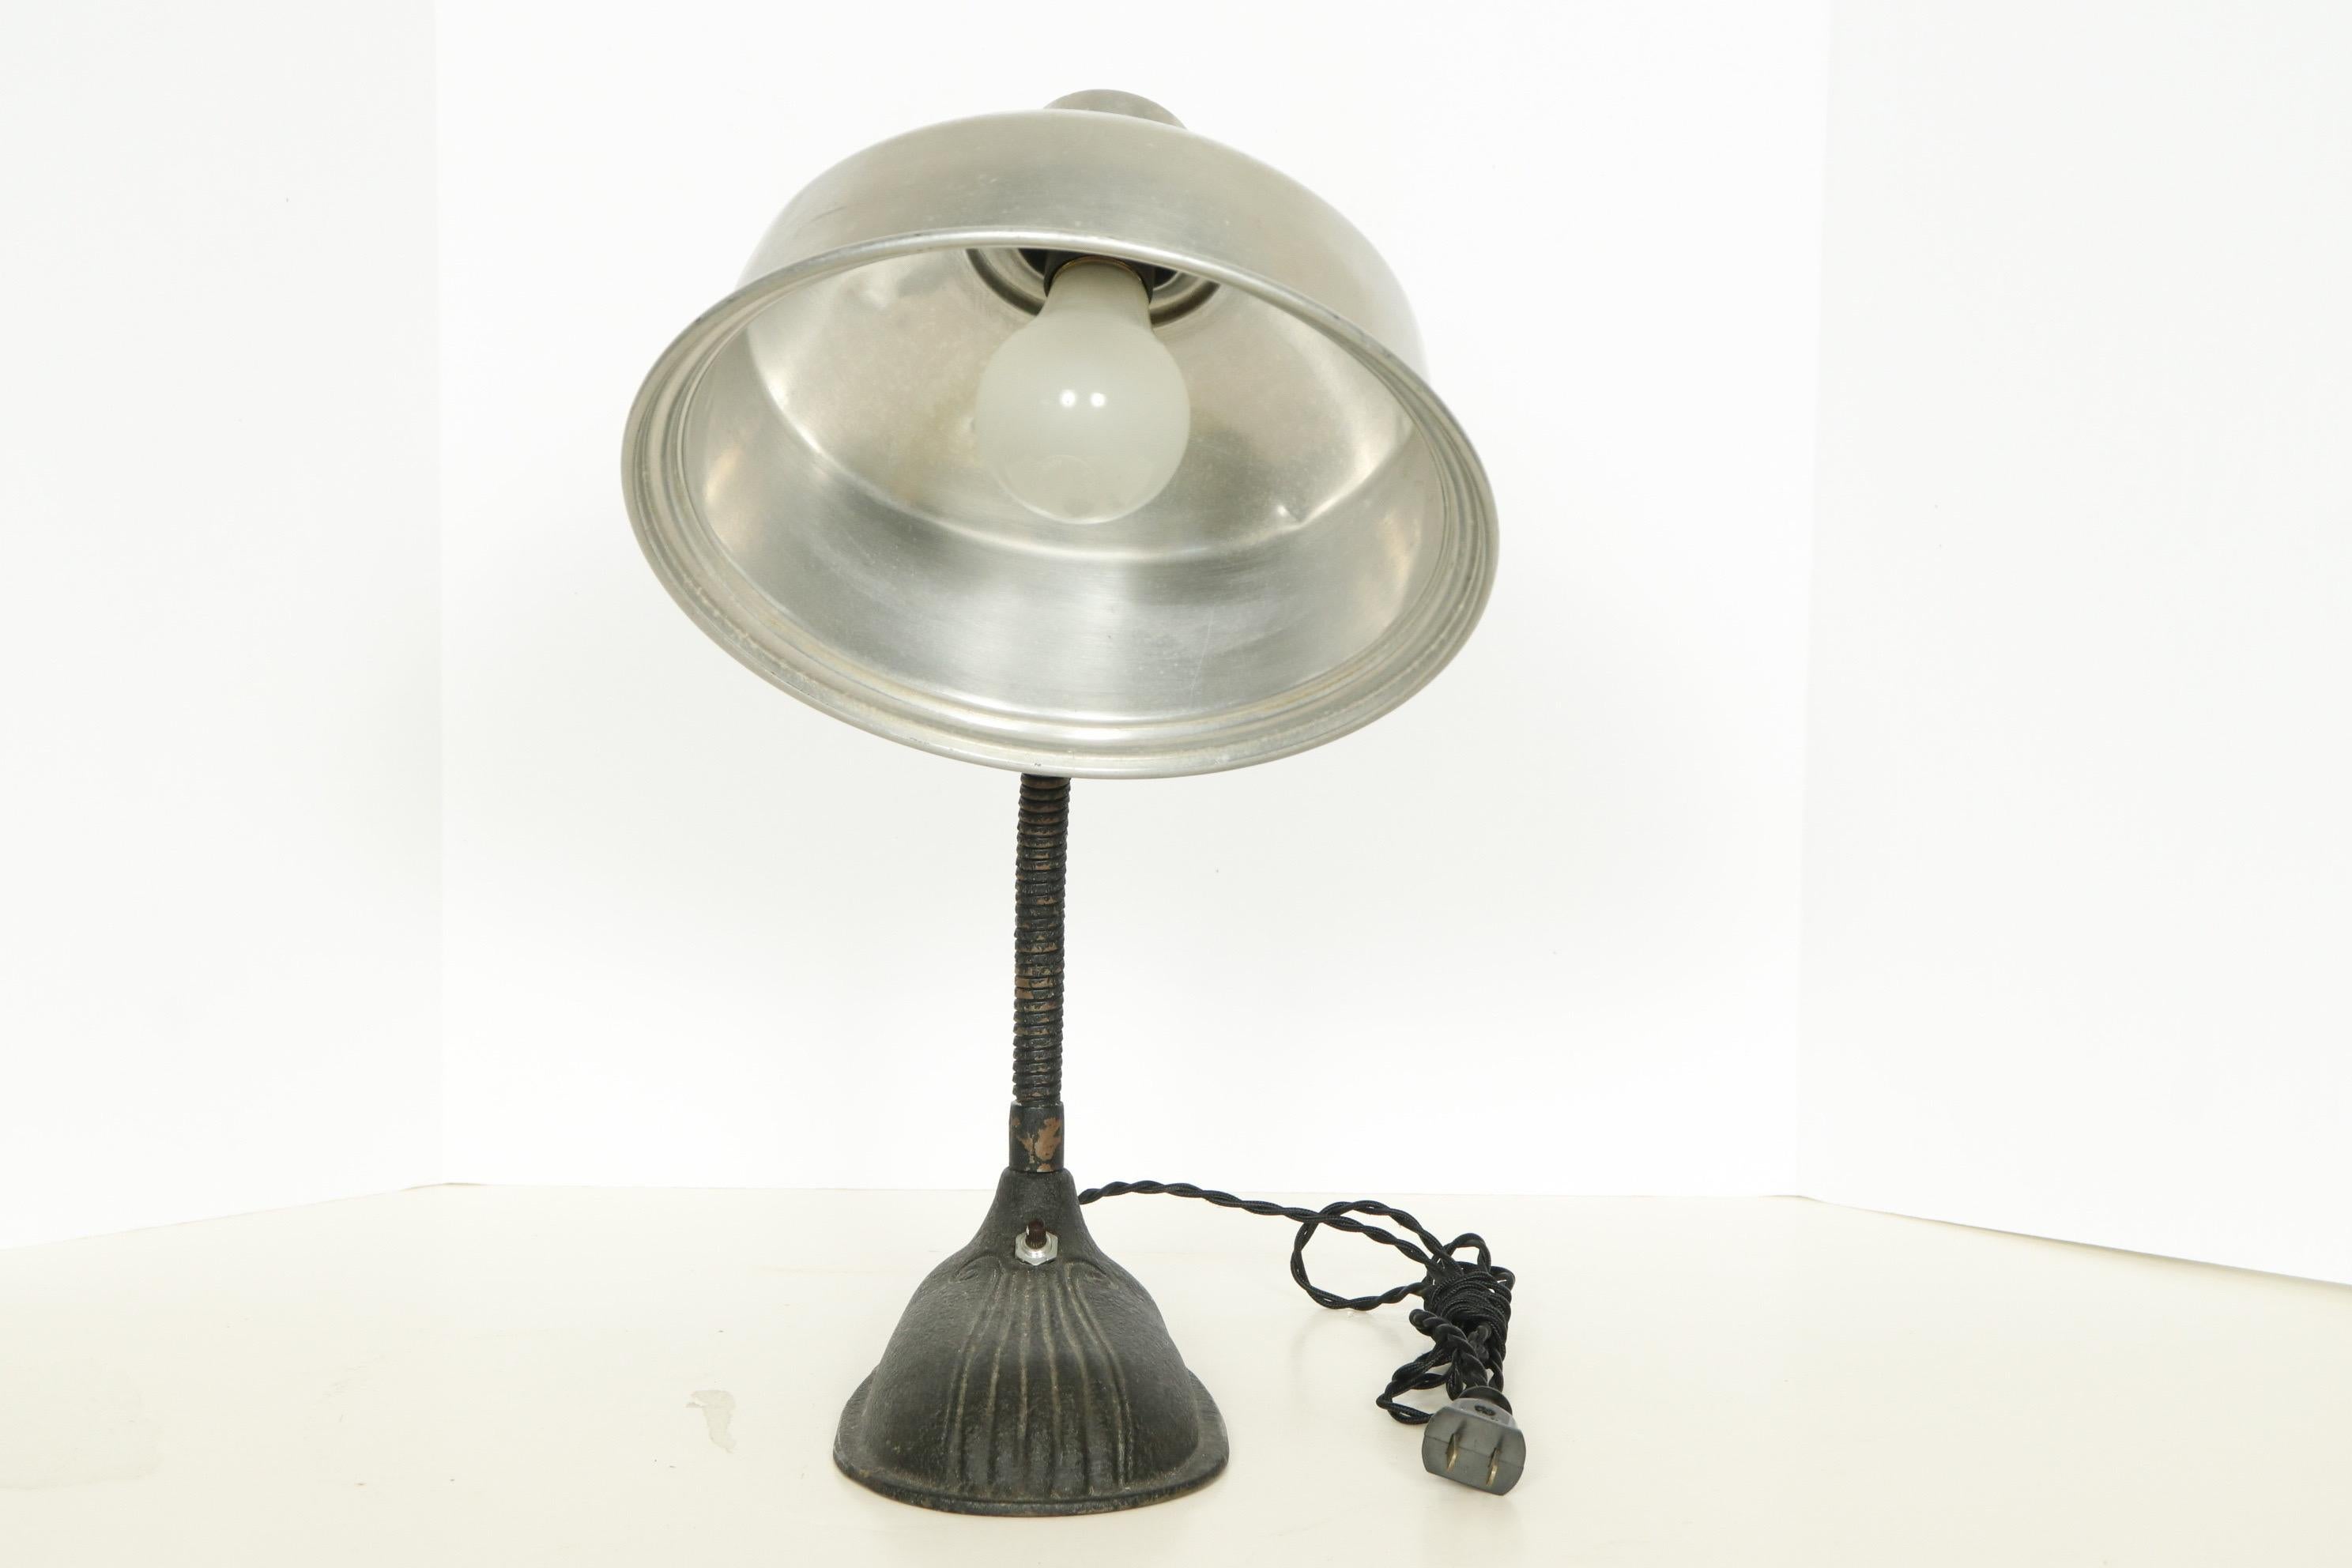 Antique industrial task lamp with an aluminum shade and black cast iron base.

USA, 1920-1930.

Features:
*Rewired with French silk twist cord
*Takes standard bulb, 60 watts max

Dimensions: 16” H x 13” L x 4.75” D.